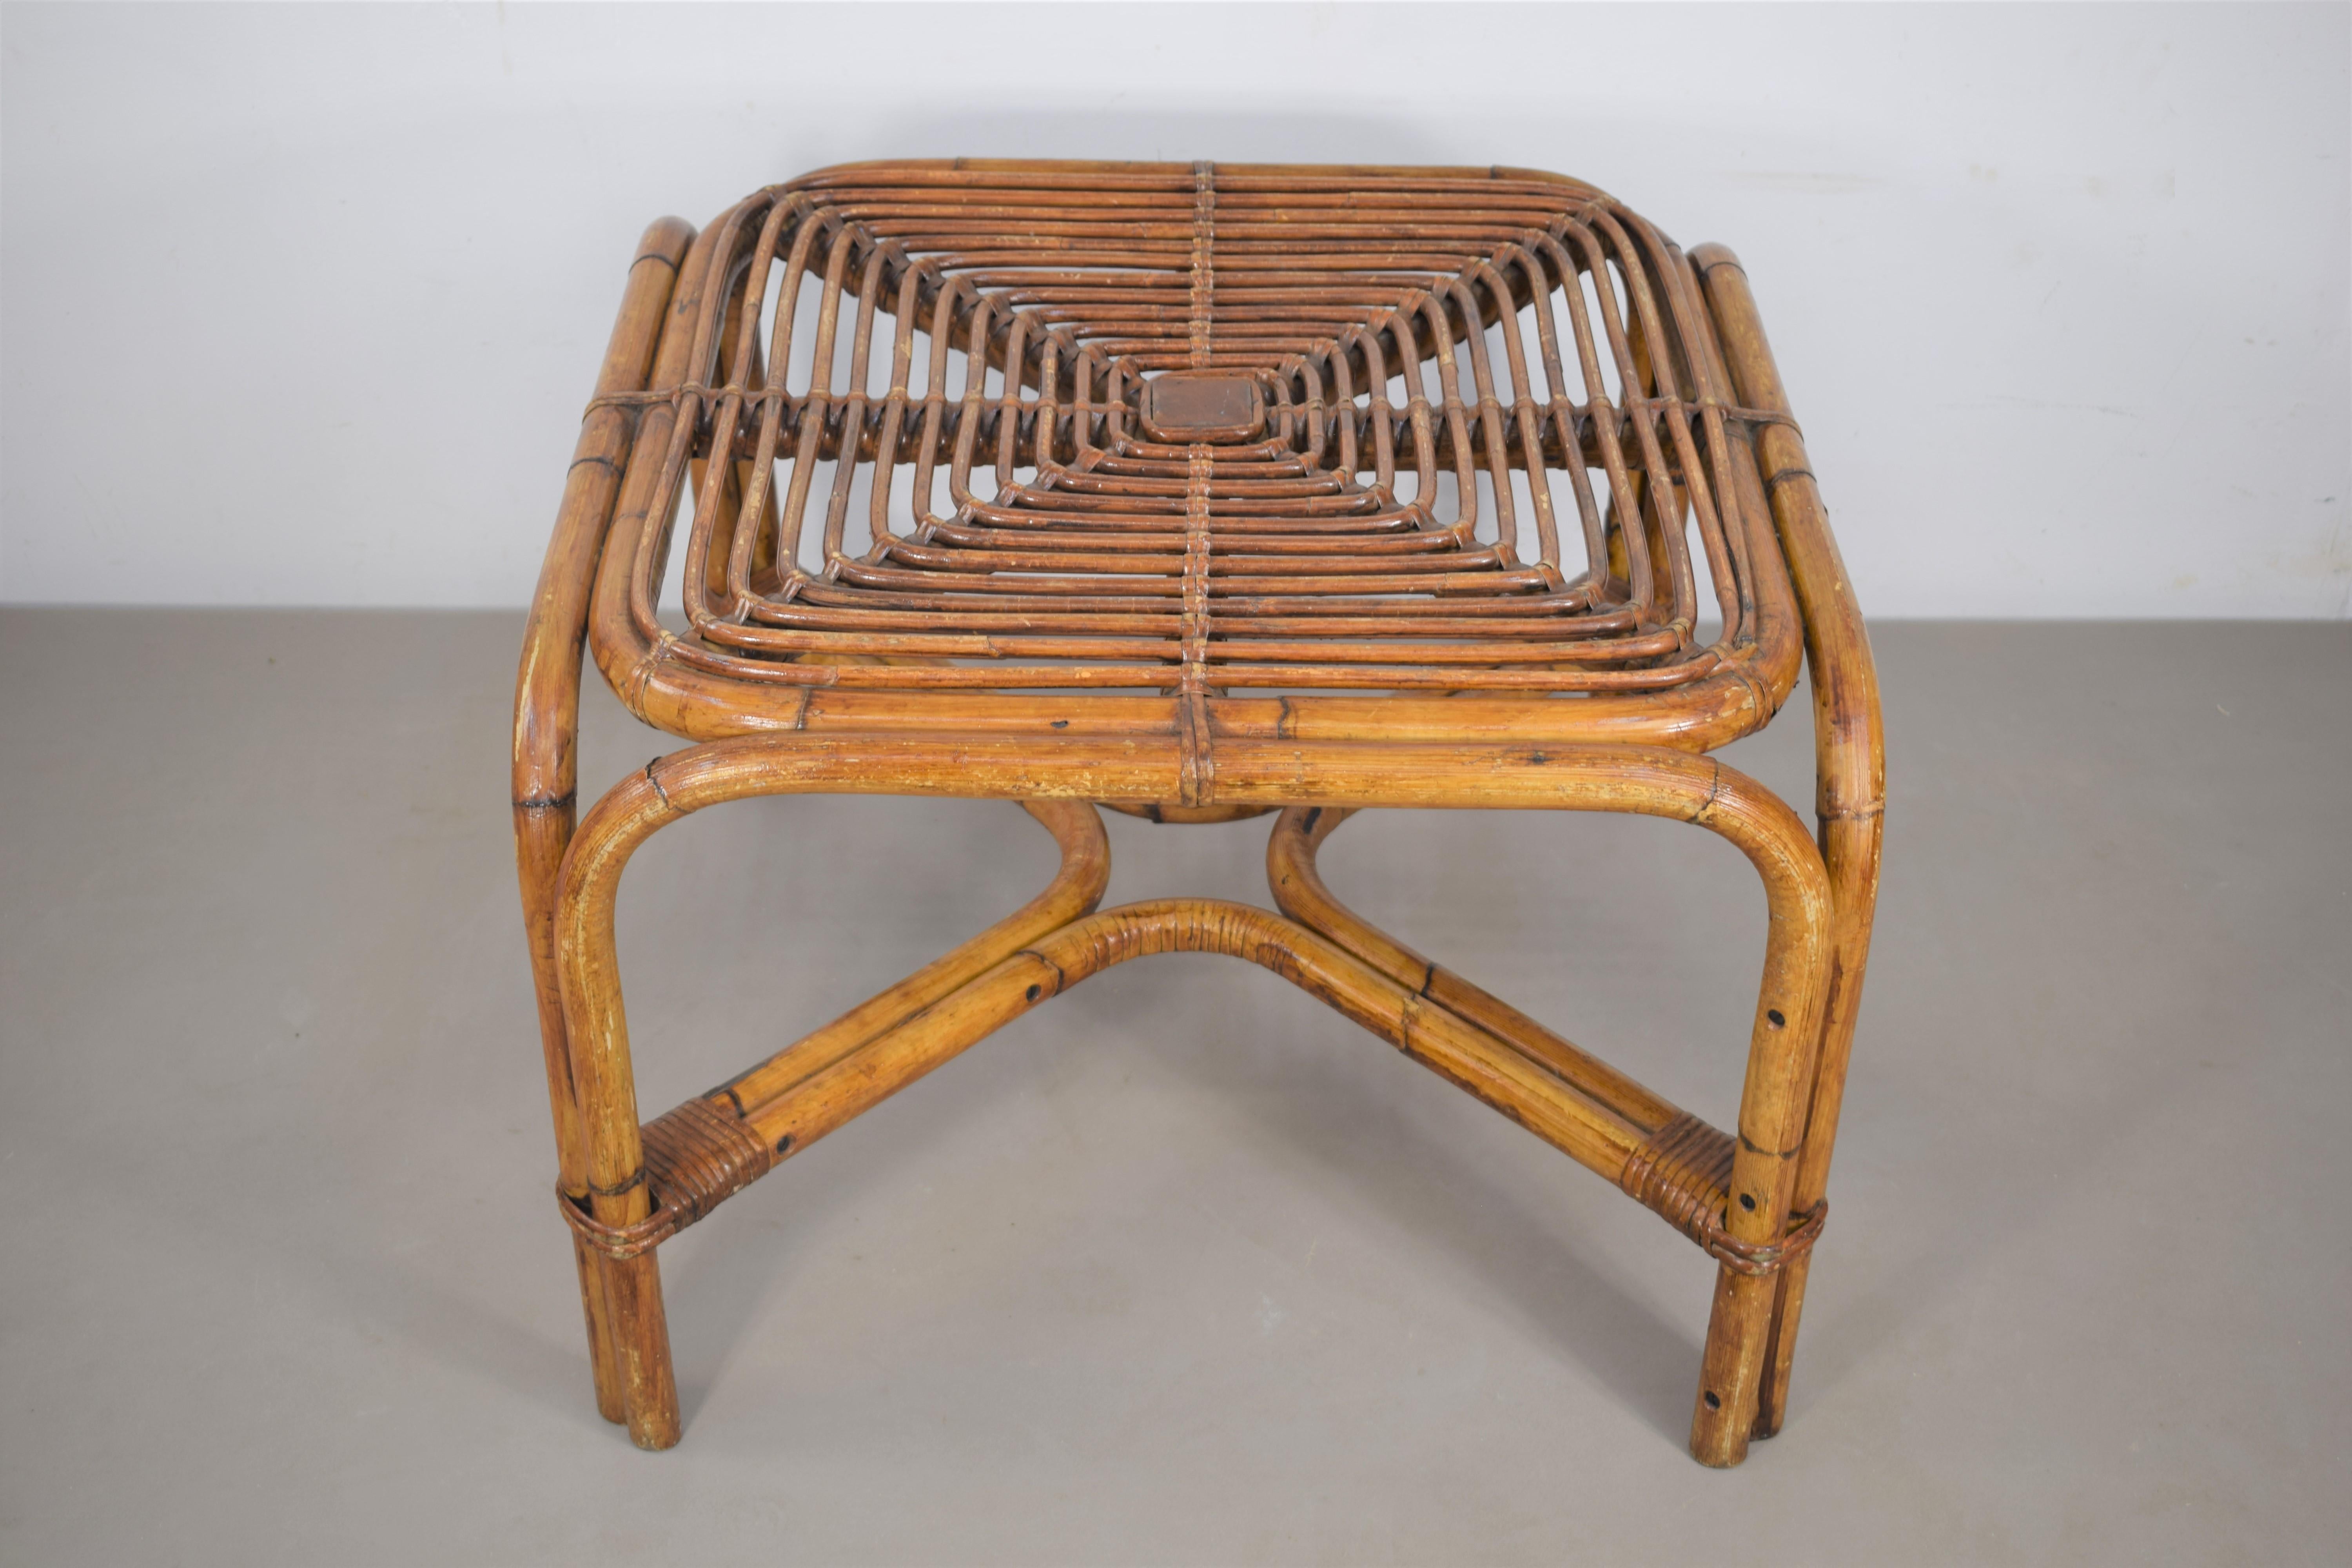 Bamboo coffee table, 1960s.
Dimensions: H=44 cm; W= 62cm; D=62 cm.